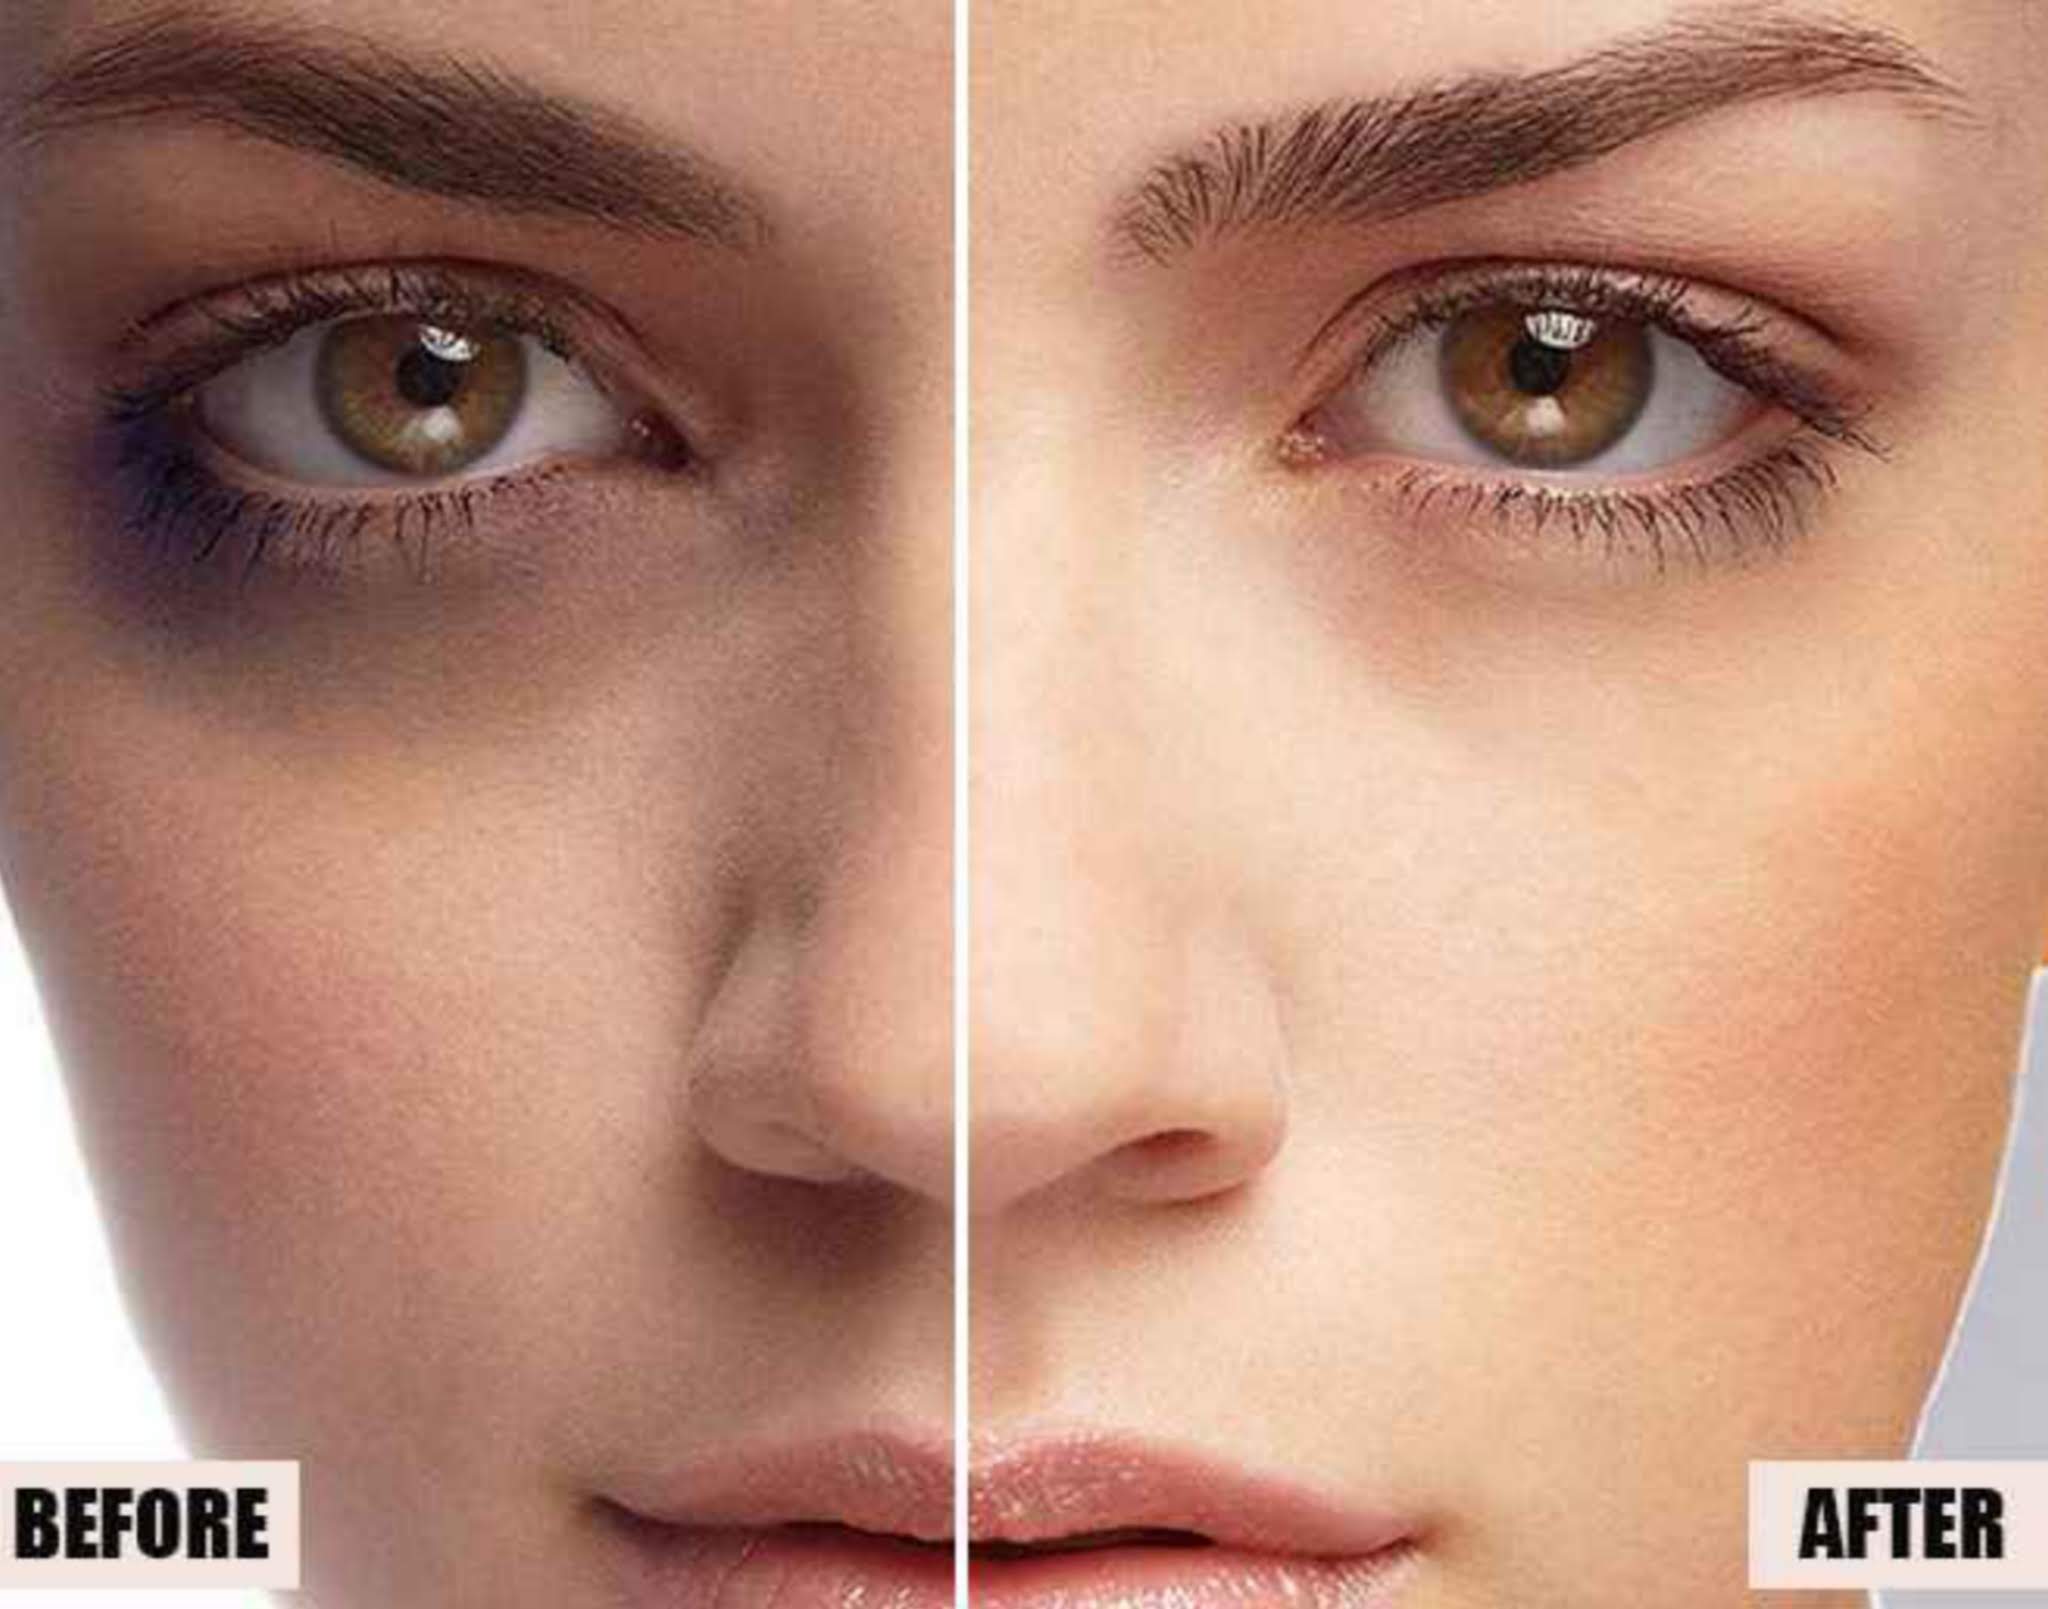 How to Get Rid of Black Circles Under Eyes Permanently Home Remedies